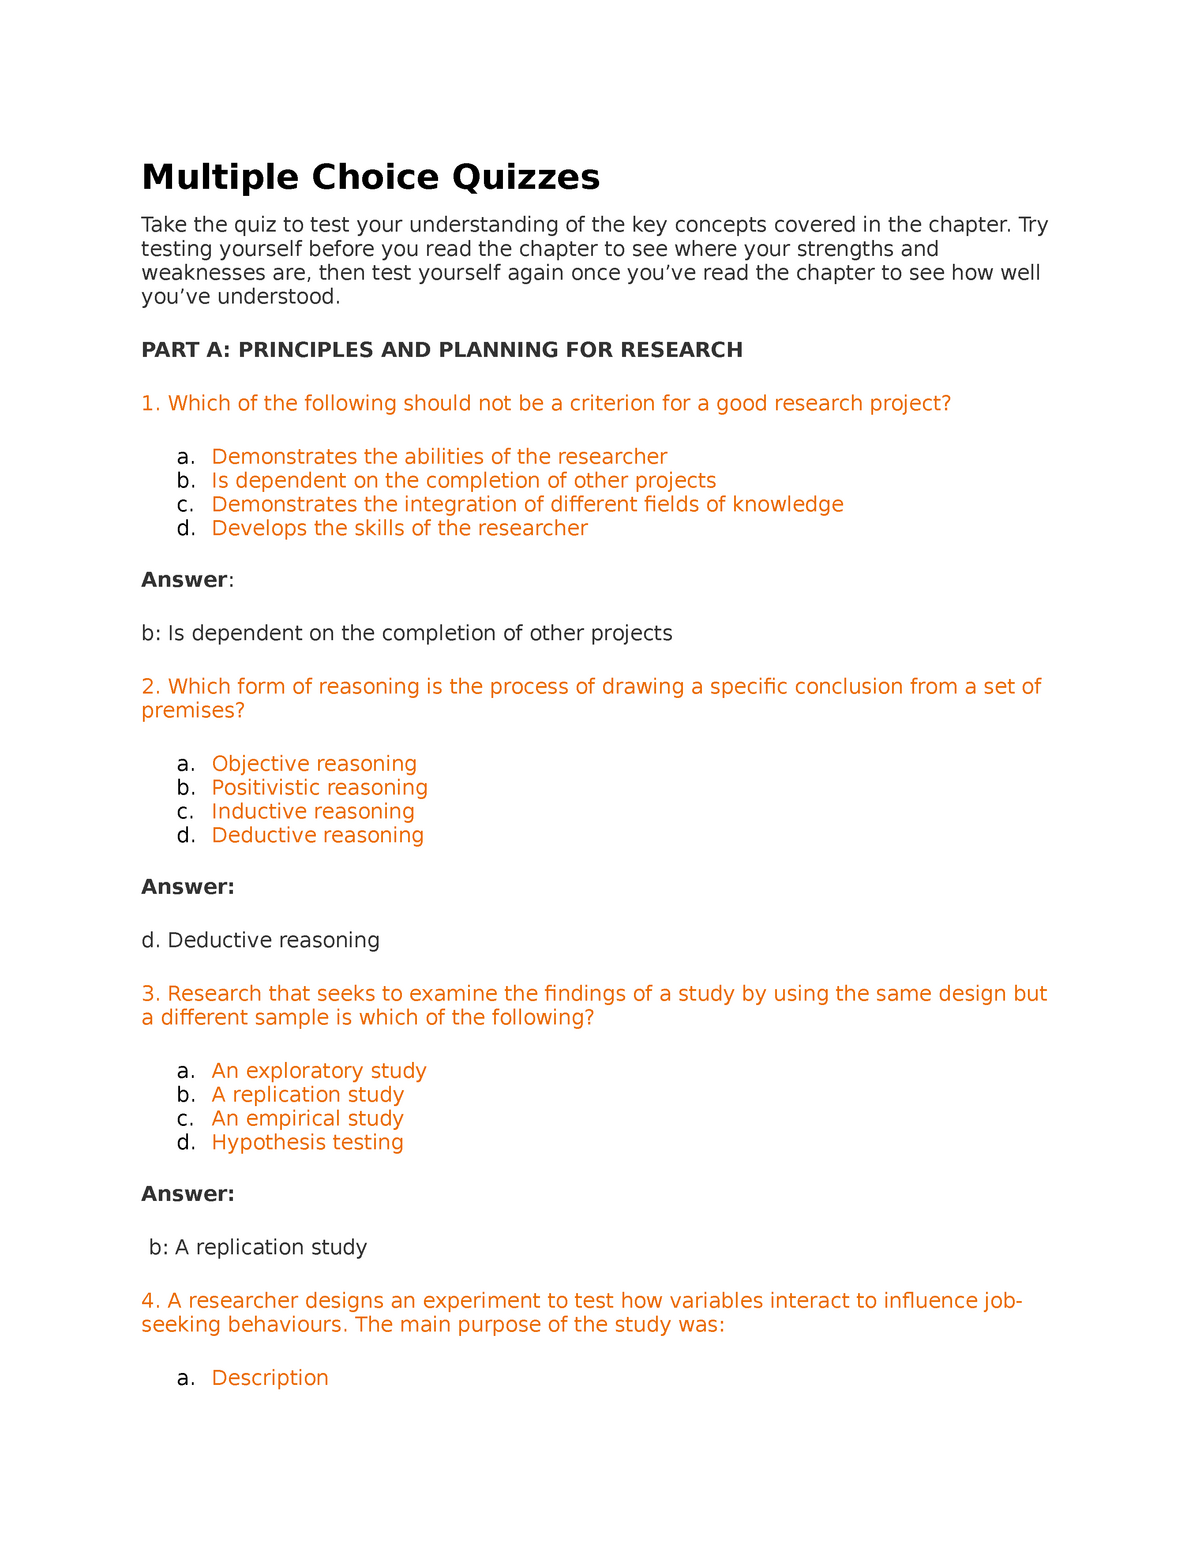 research design multiple choice questions and answers